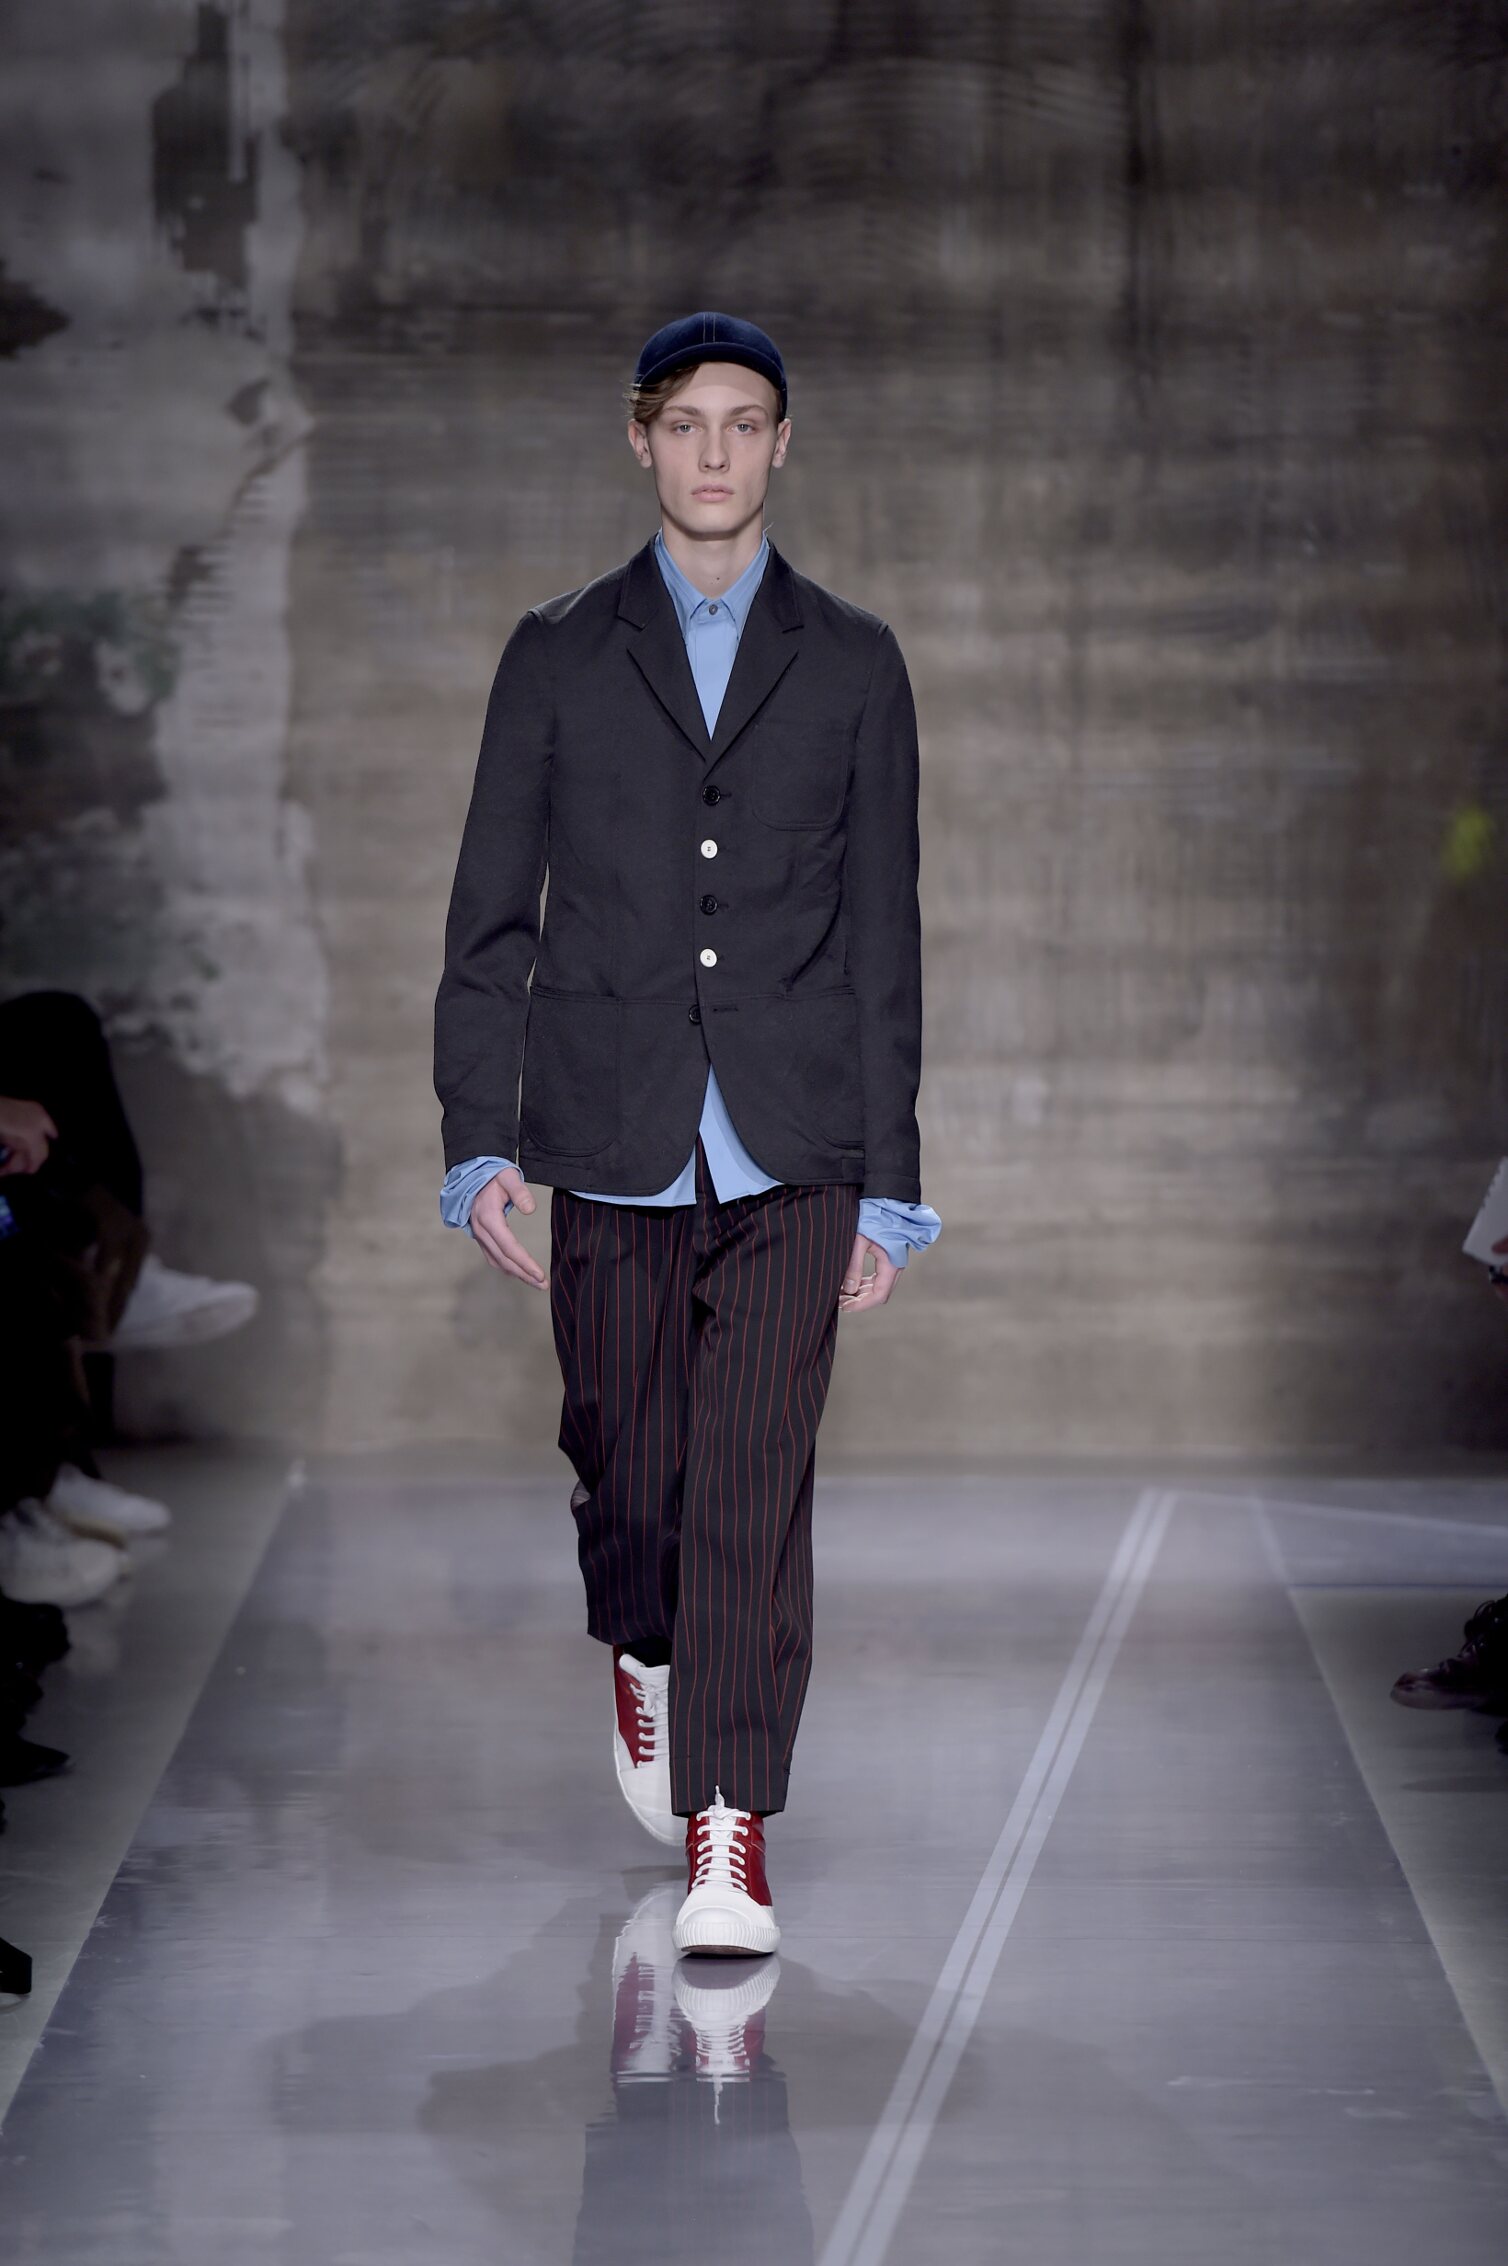 MARNI FALL WINTER 2016-17 MEN’S COLLECTION | The Skinny Beep